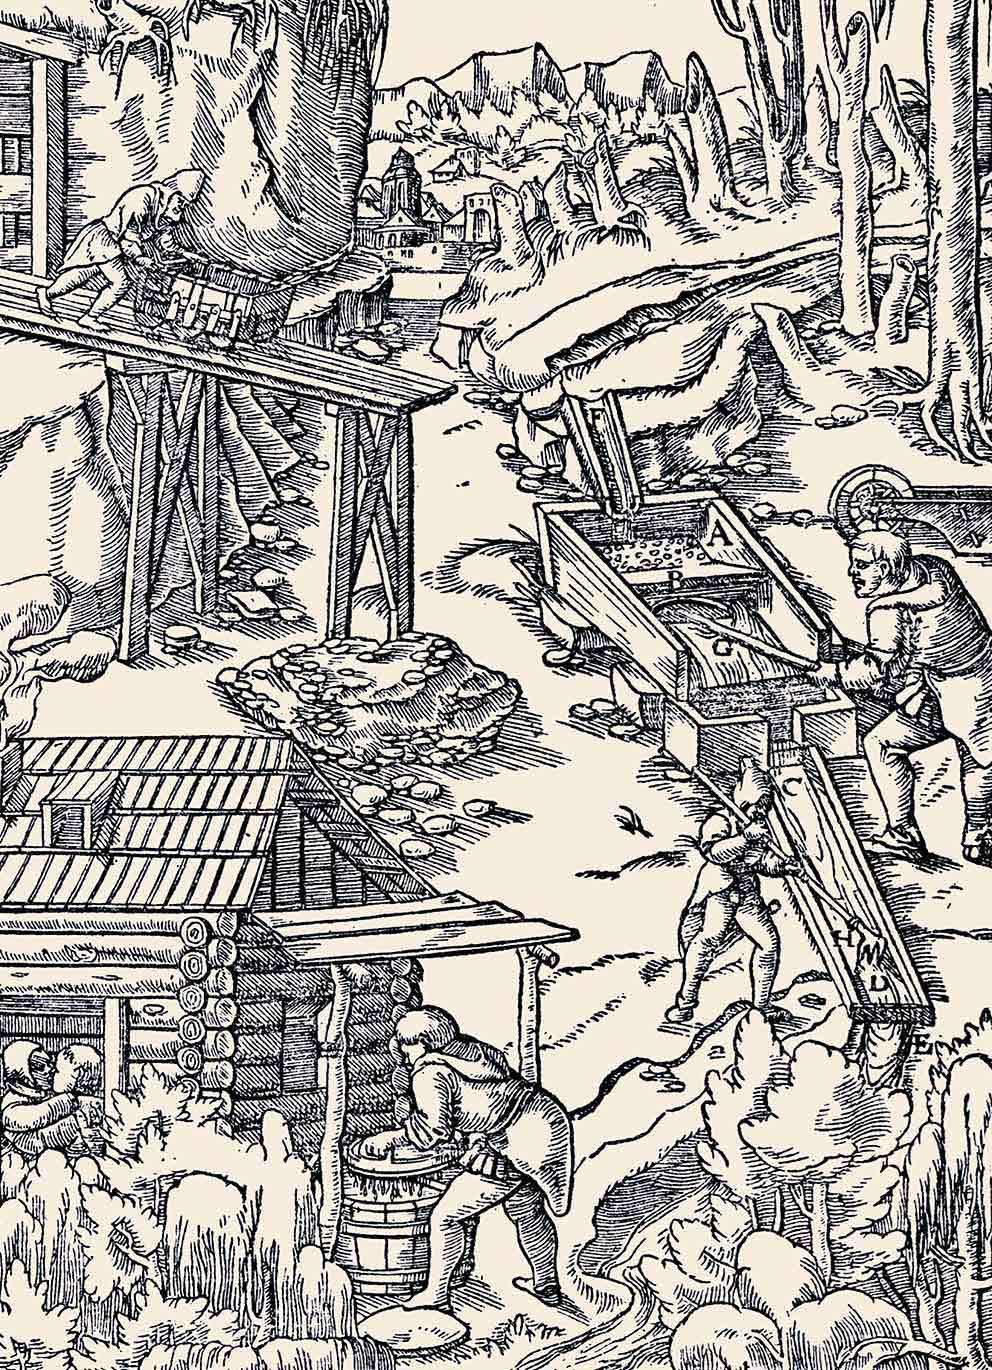 A 16th-century woodcut showing tin-streaming – the normal method of recovering shallow deposits of tin in the Middle Ages